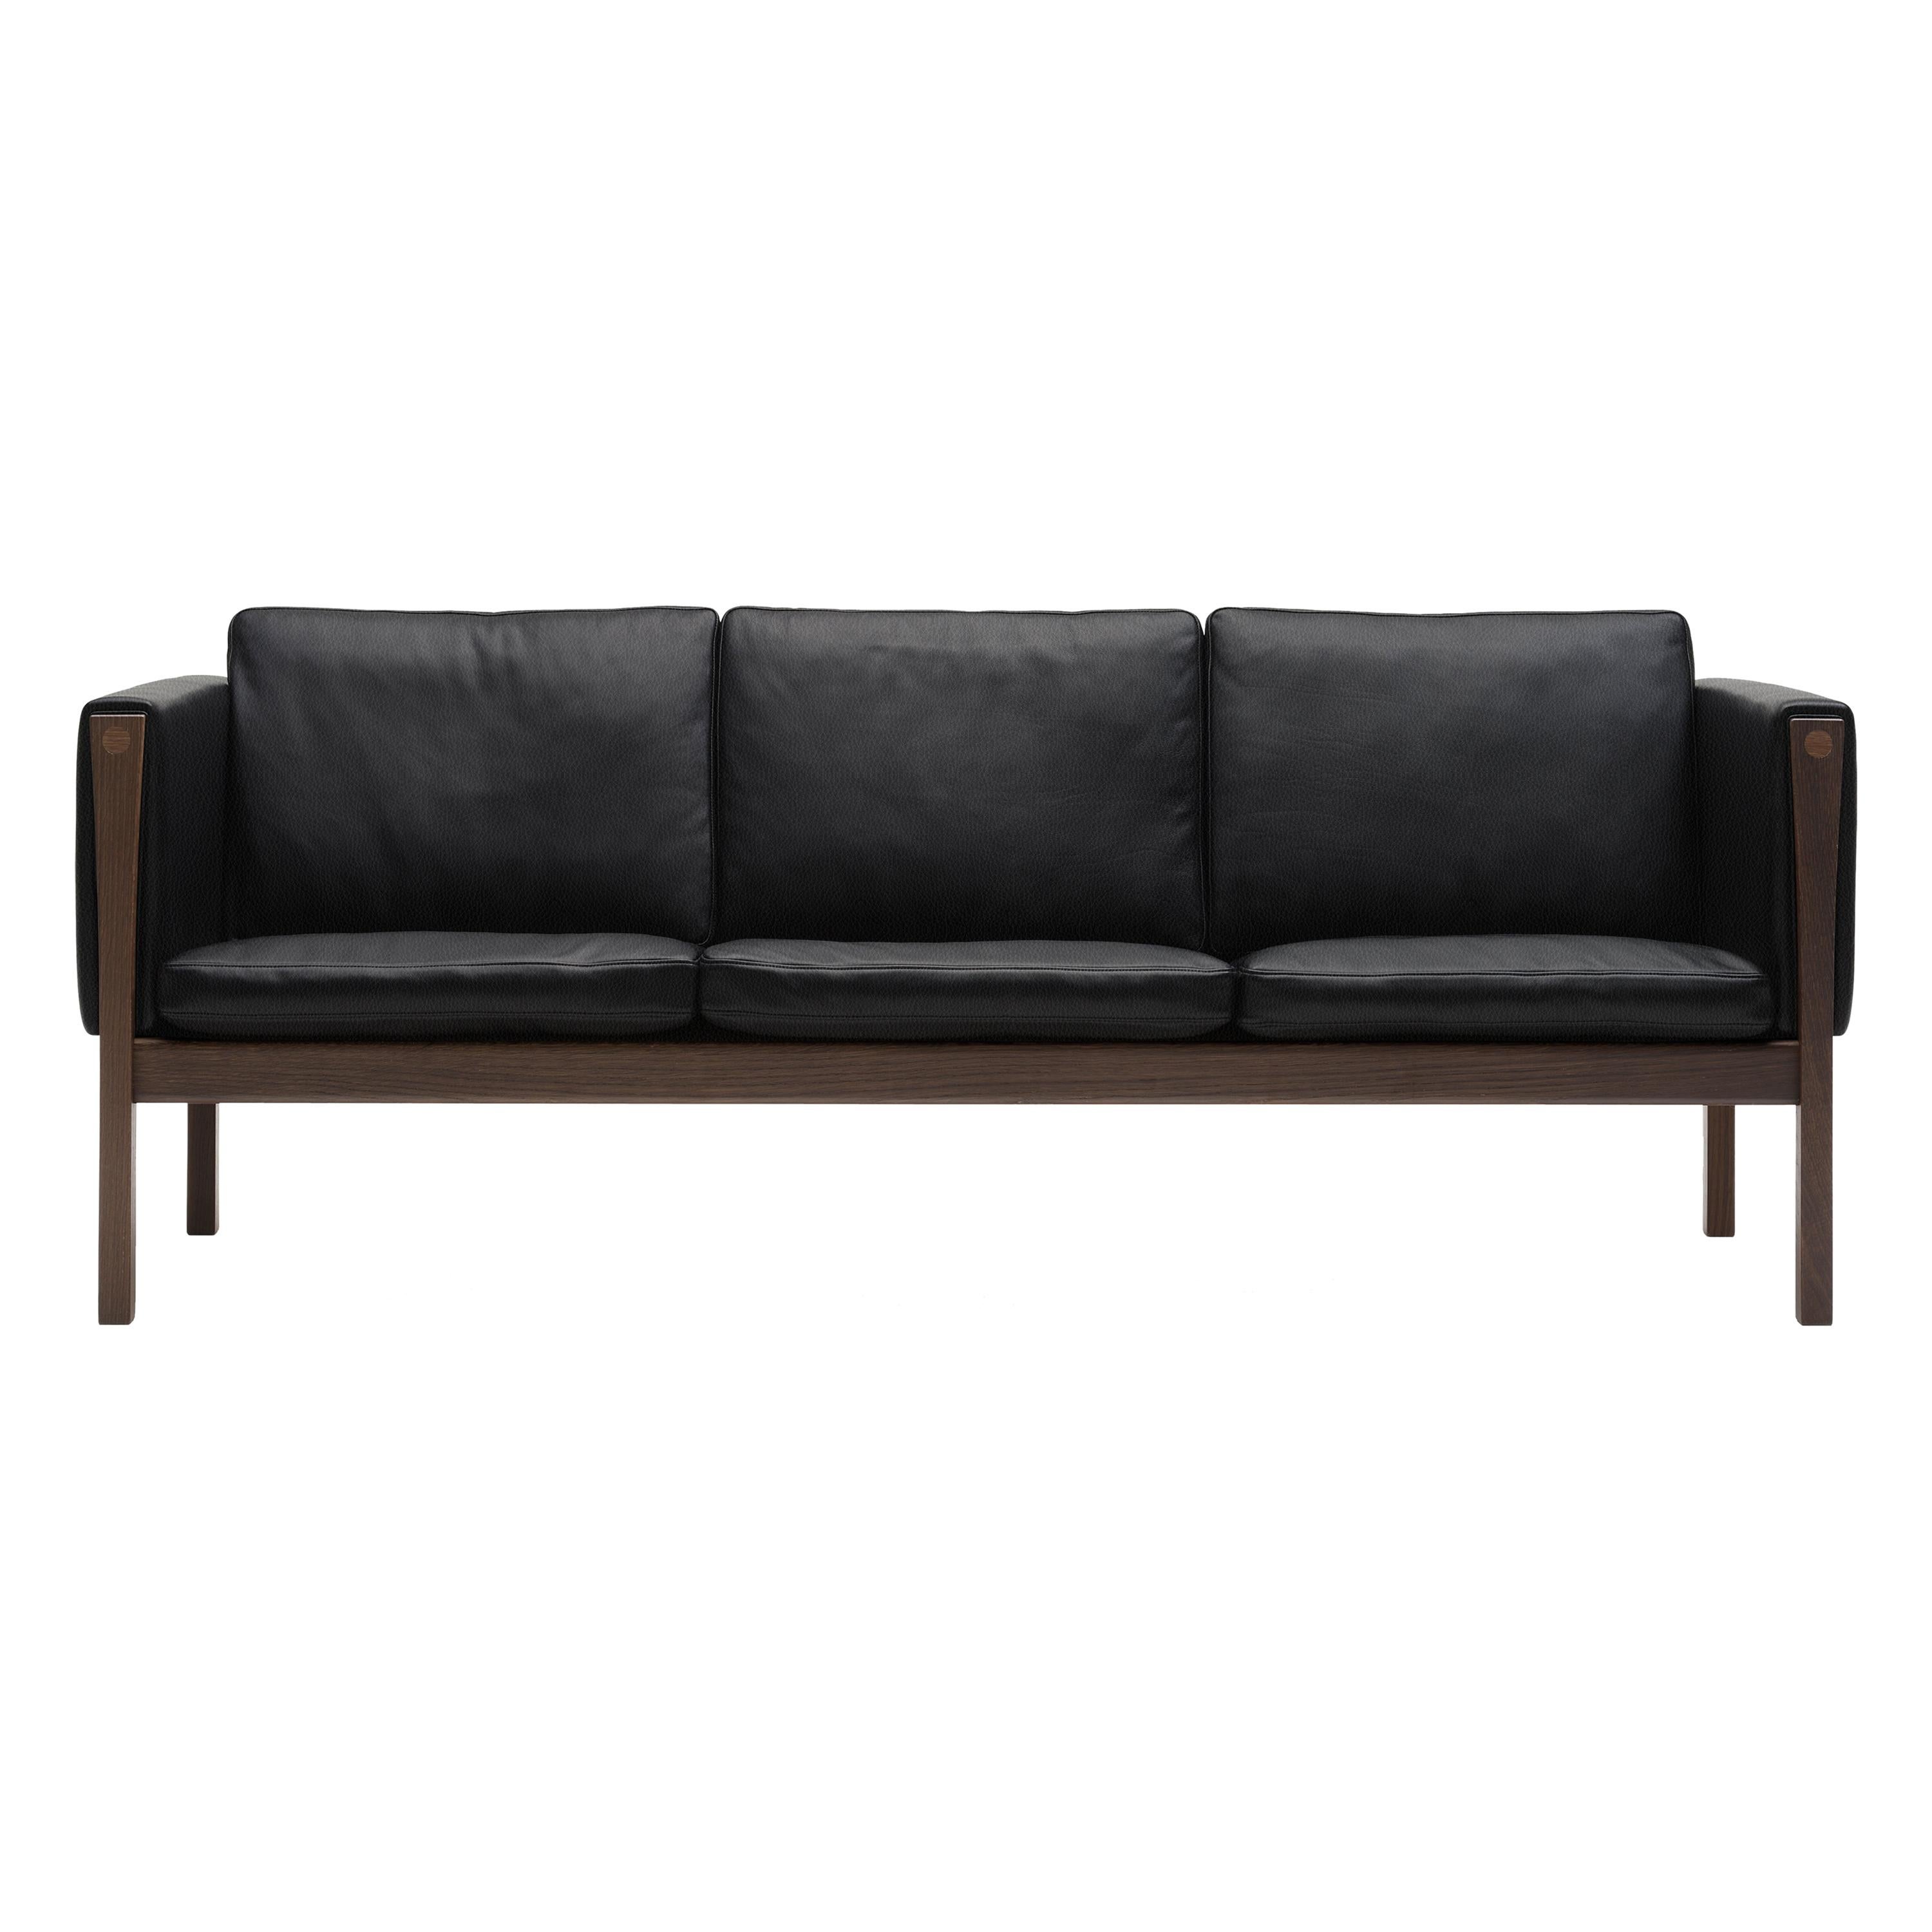 Black (Thor 301) CH163 Sofa in Walnut Oil Frame with Leather Upholstery by Hans J. Wegner